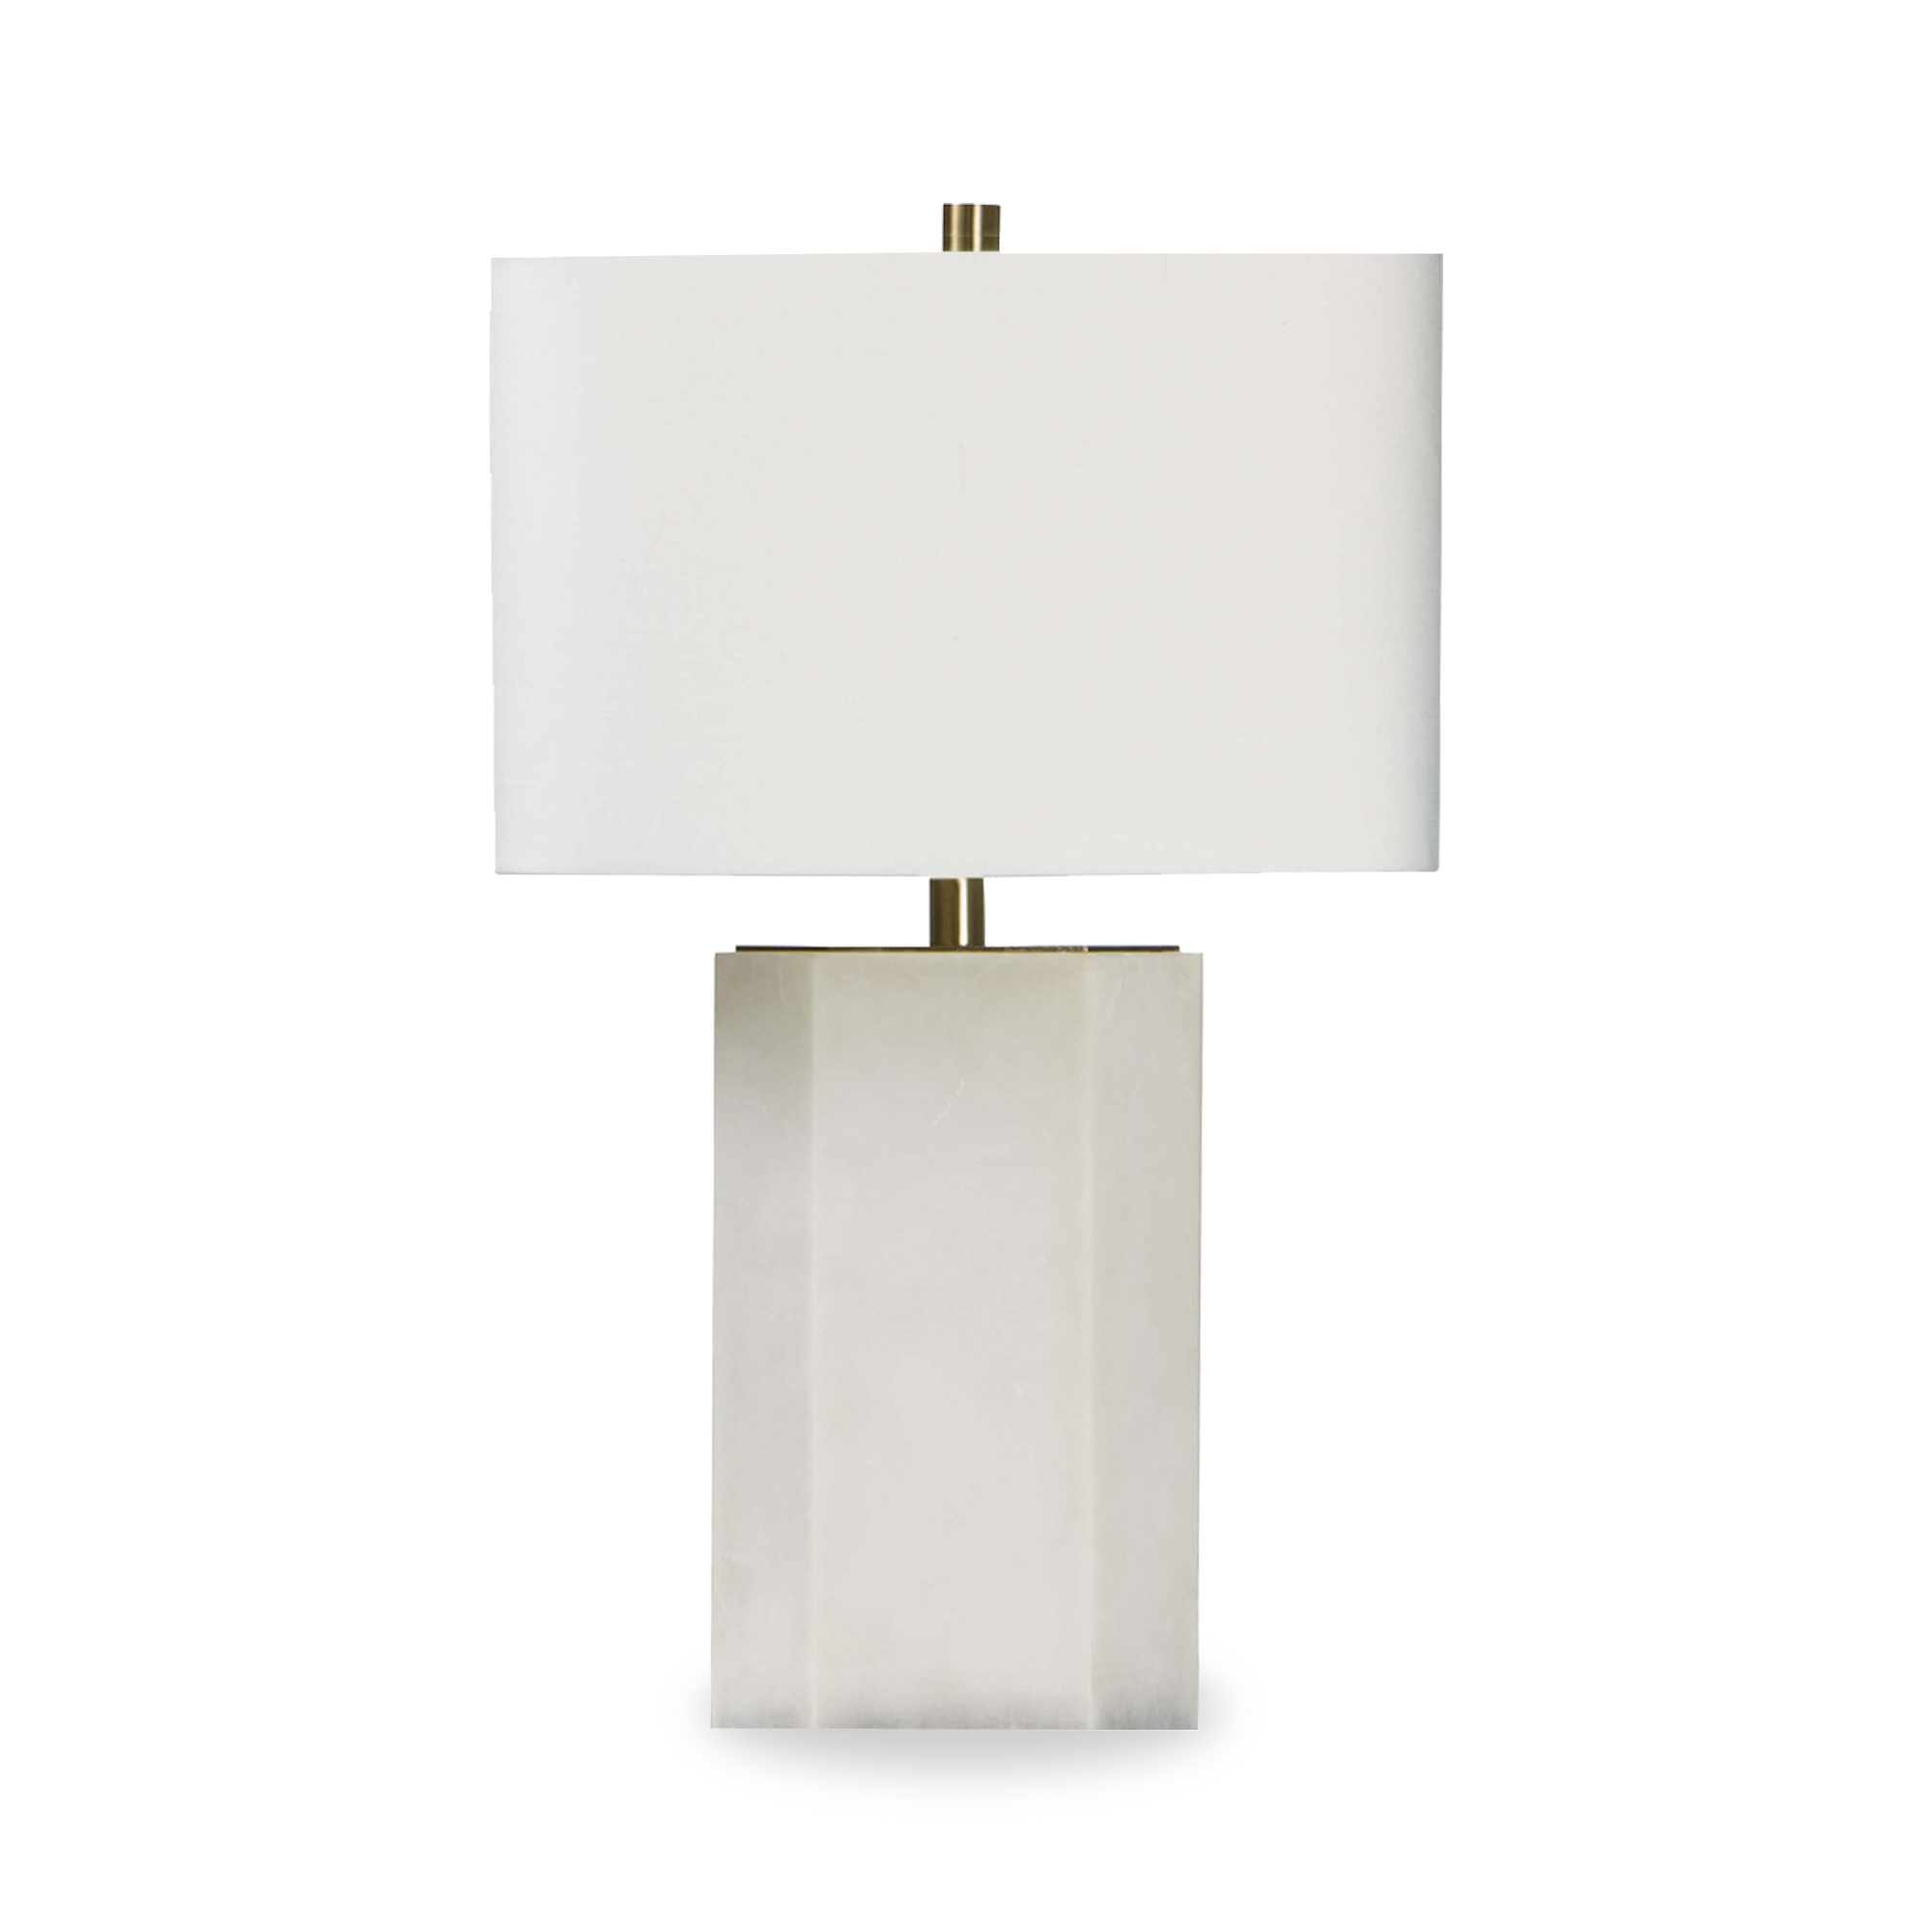 Clean lines and elemental materials lend an iconic quality to the Alabaster Block table lamp.